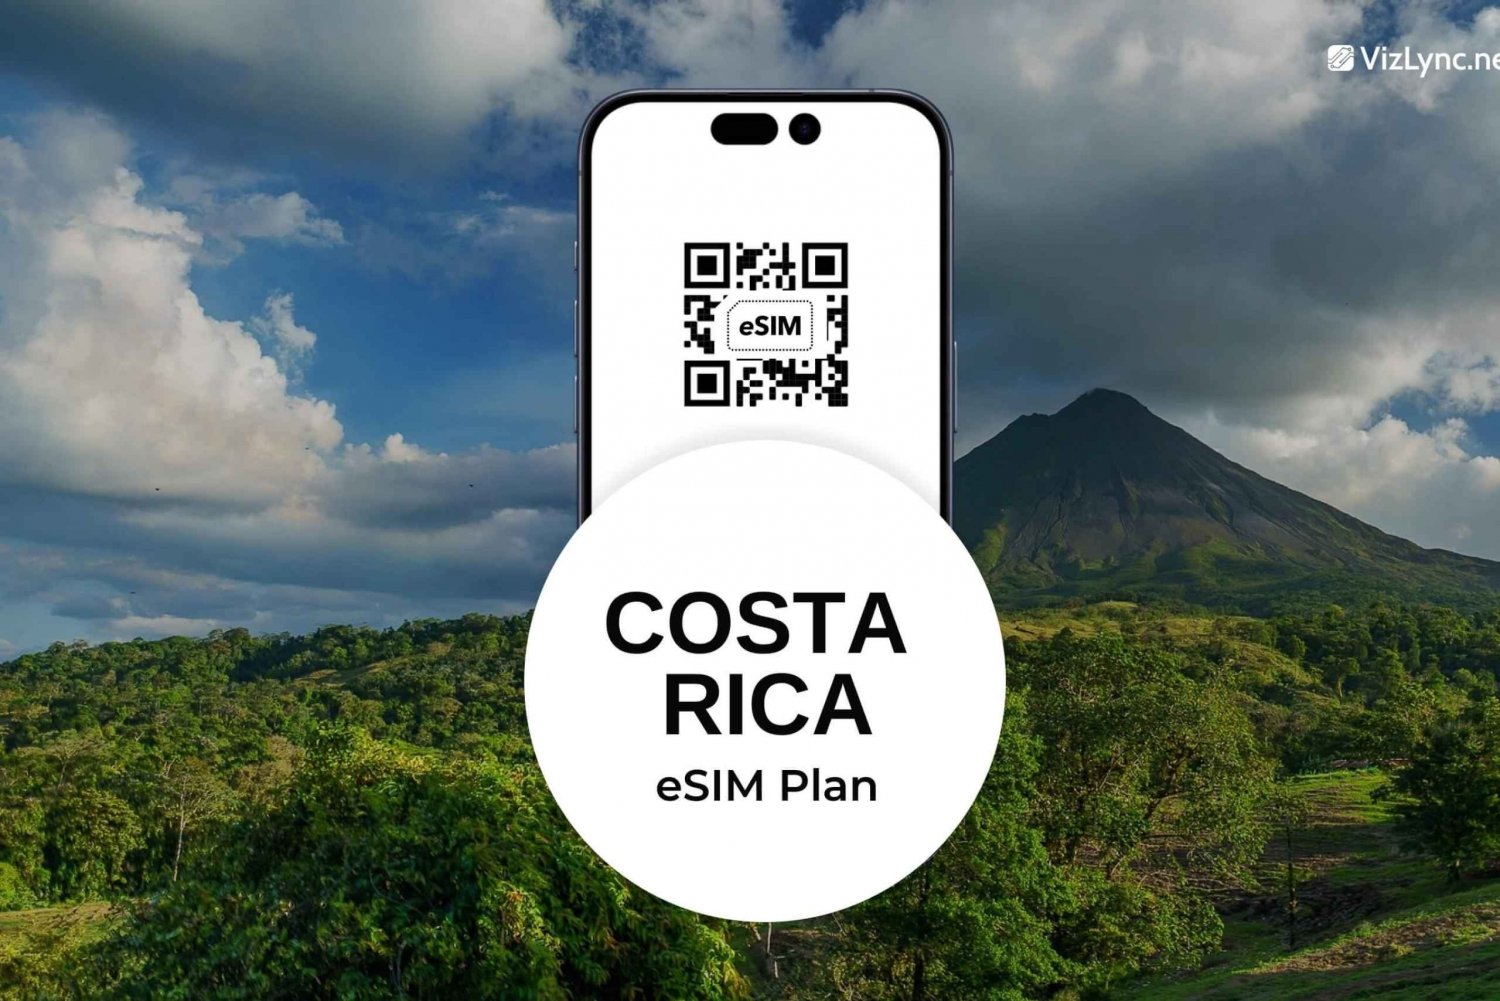 Costa Rica: Digital Frontier with eSIM Technology